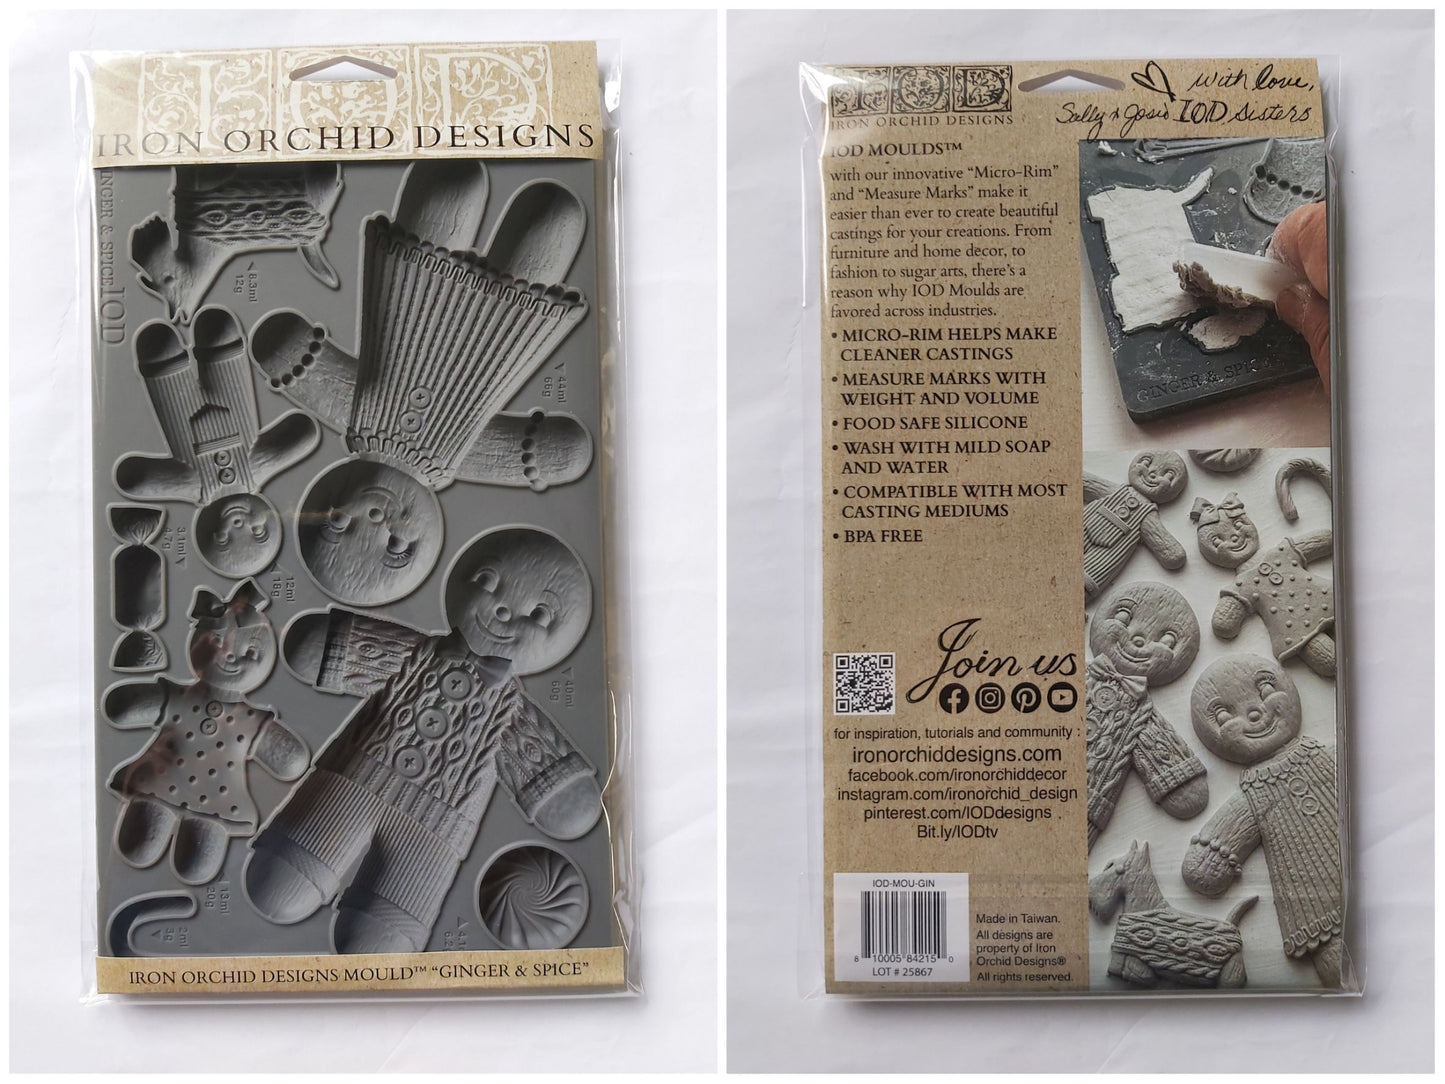 Iron Orchid Designs - Mould - Ginger & Spice - Limited Edition